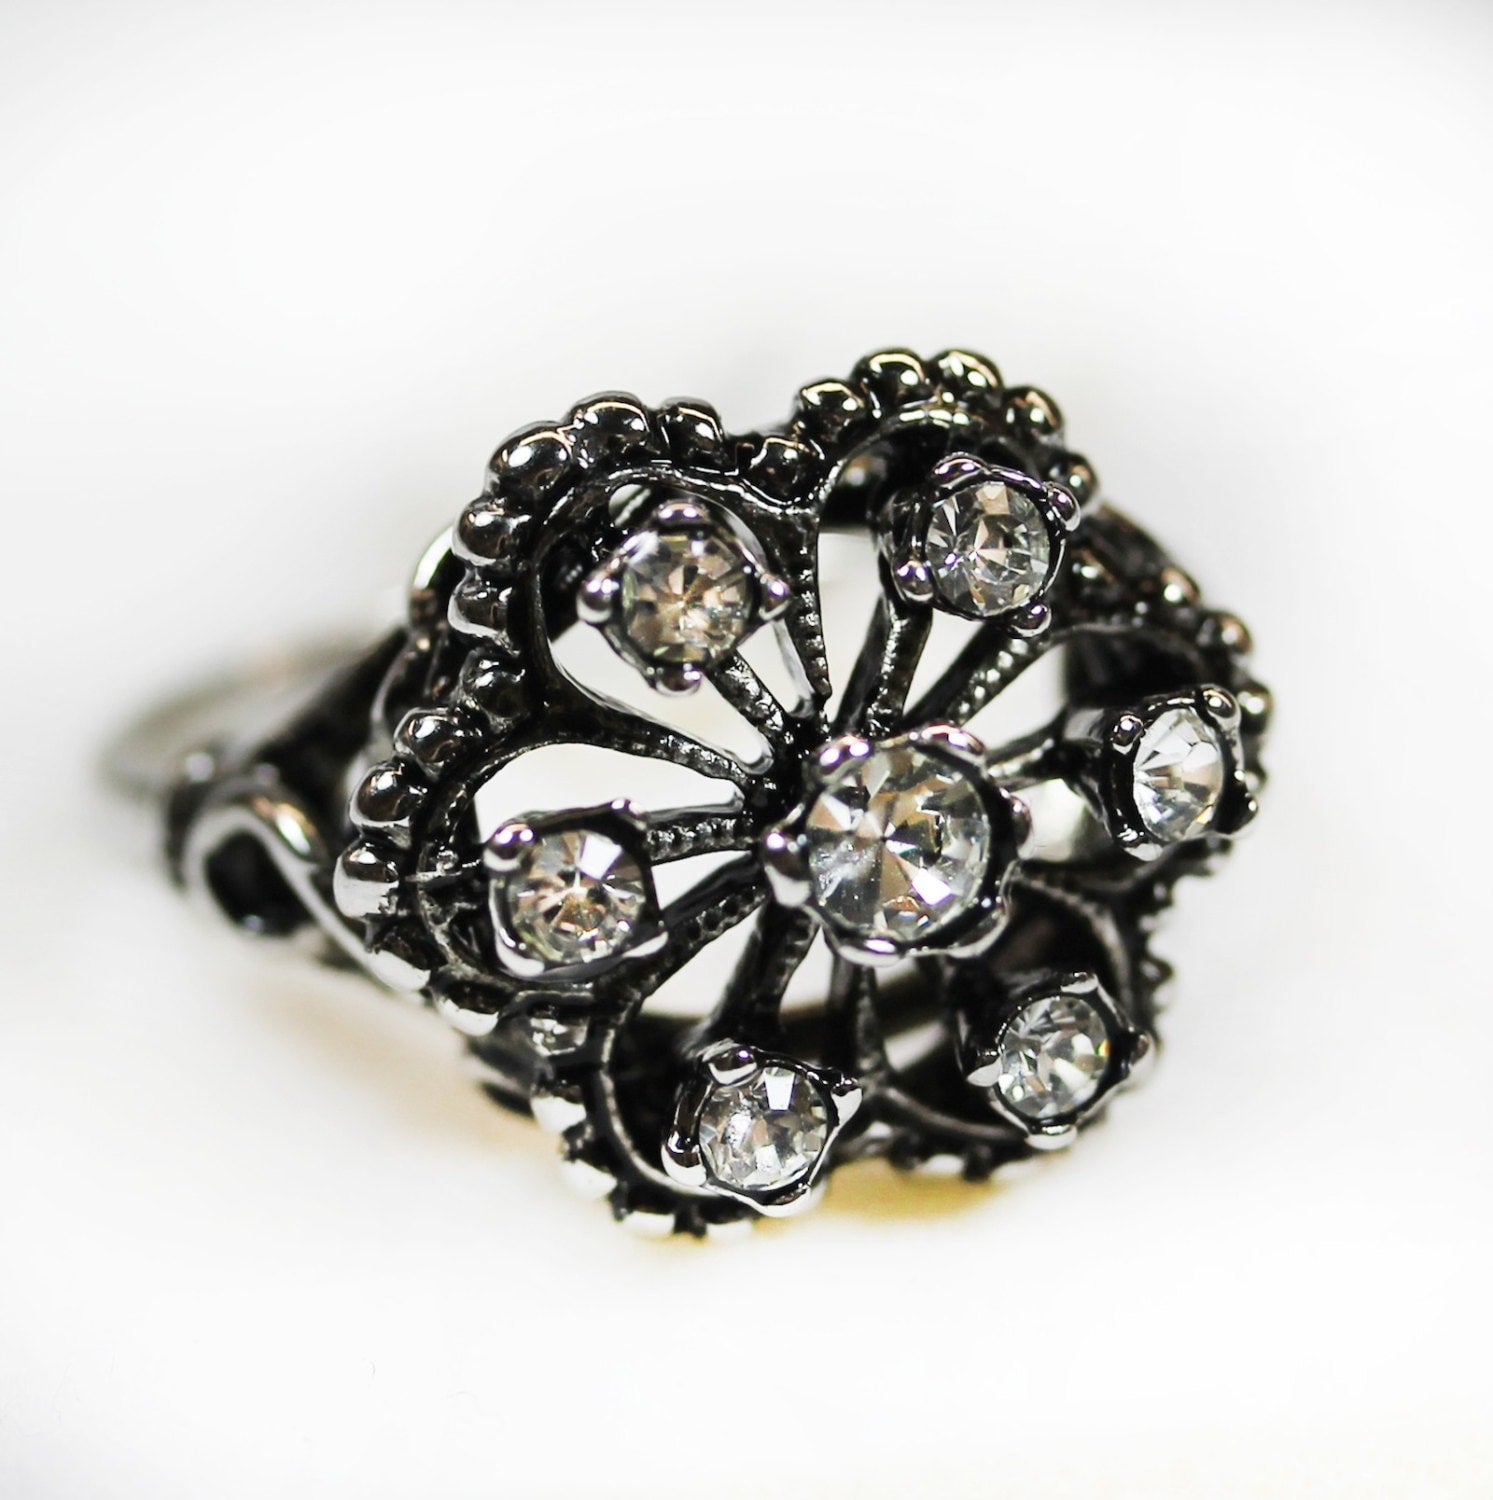 Vintage Ring Filigree Style Ring Genuine Swarovski Crystals Antique 18k White Gold Silver Womans Jewlery #R103 - Limited Stock - Never Worn